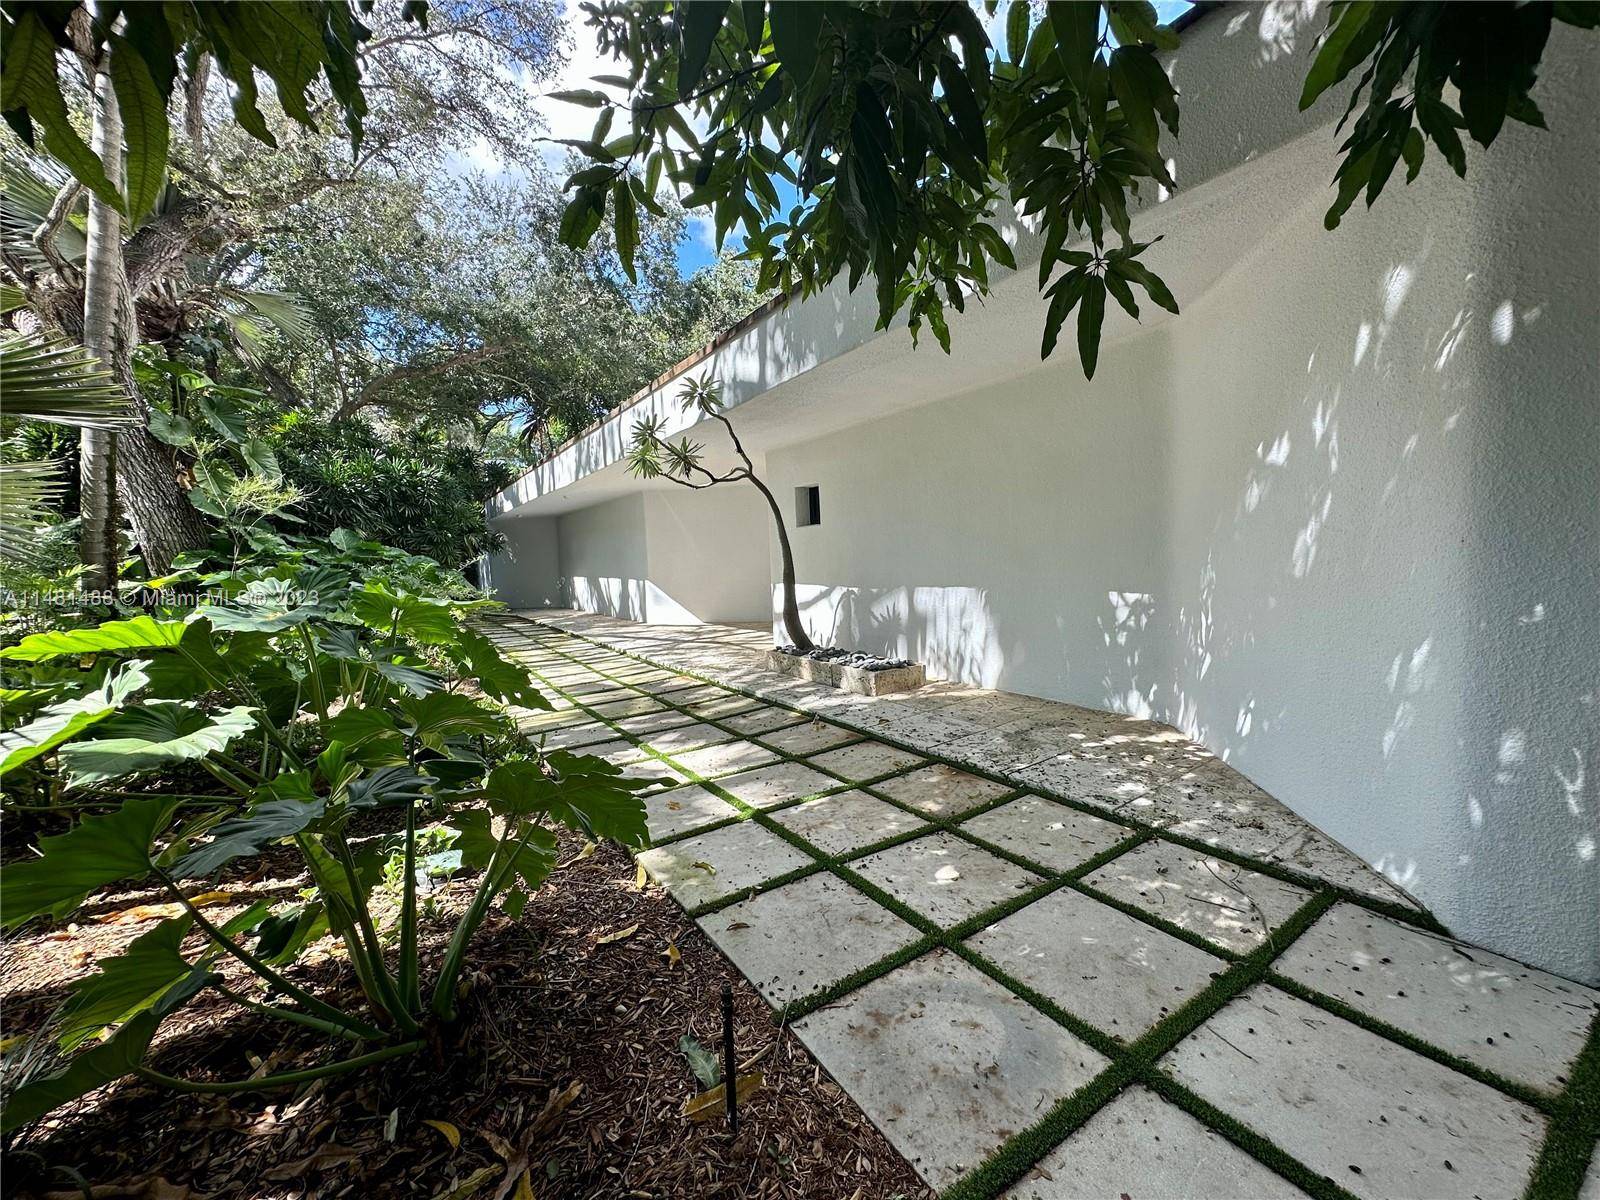 Classic modern masterpiece designed by renowned minimalist architect, Jorge Arango, offers timeless construction, style and quality, located on one of the most coveted private lanes in all of Coconut Grove.